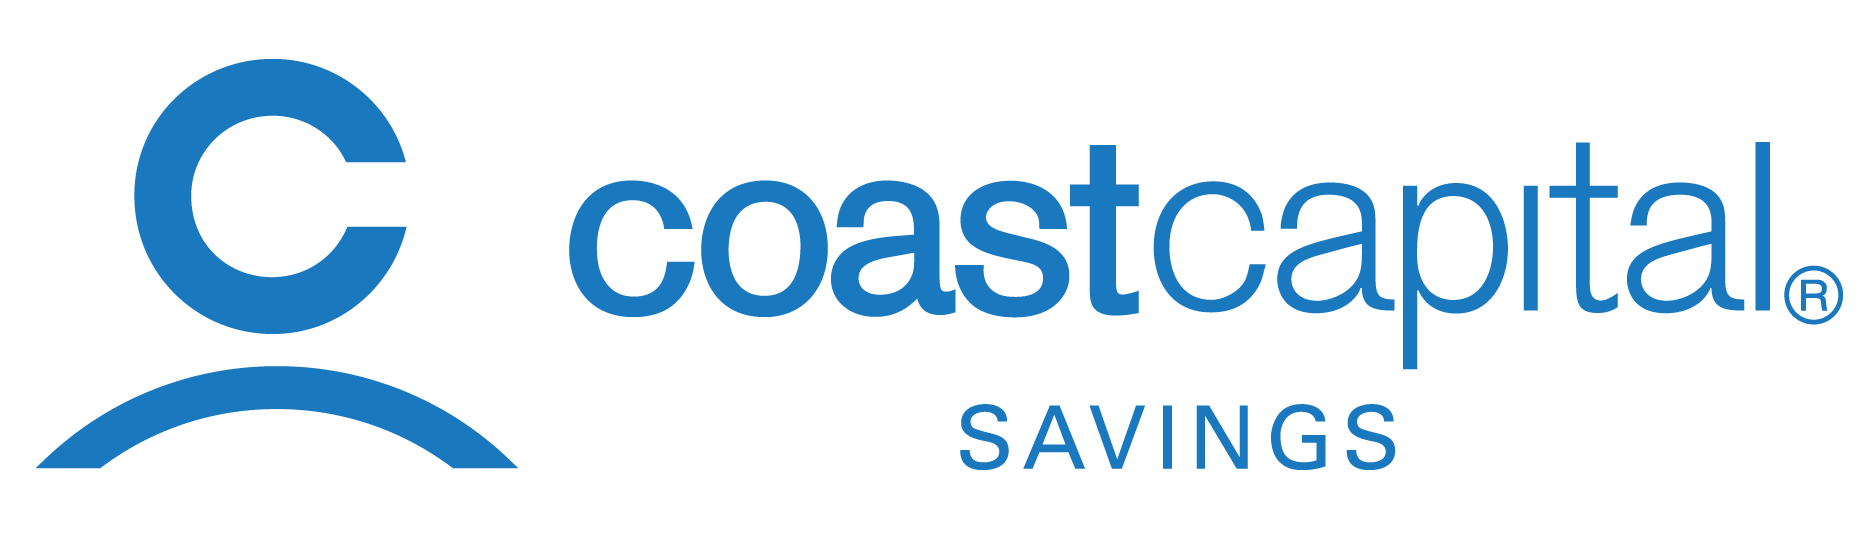 Icon for coast capital savings showing that Always A Way can get car loans approved through this bank.